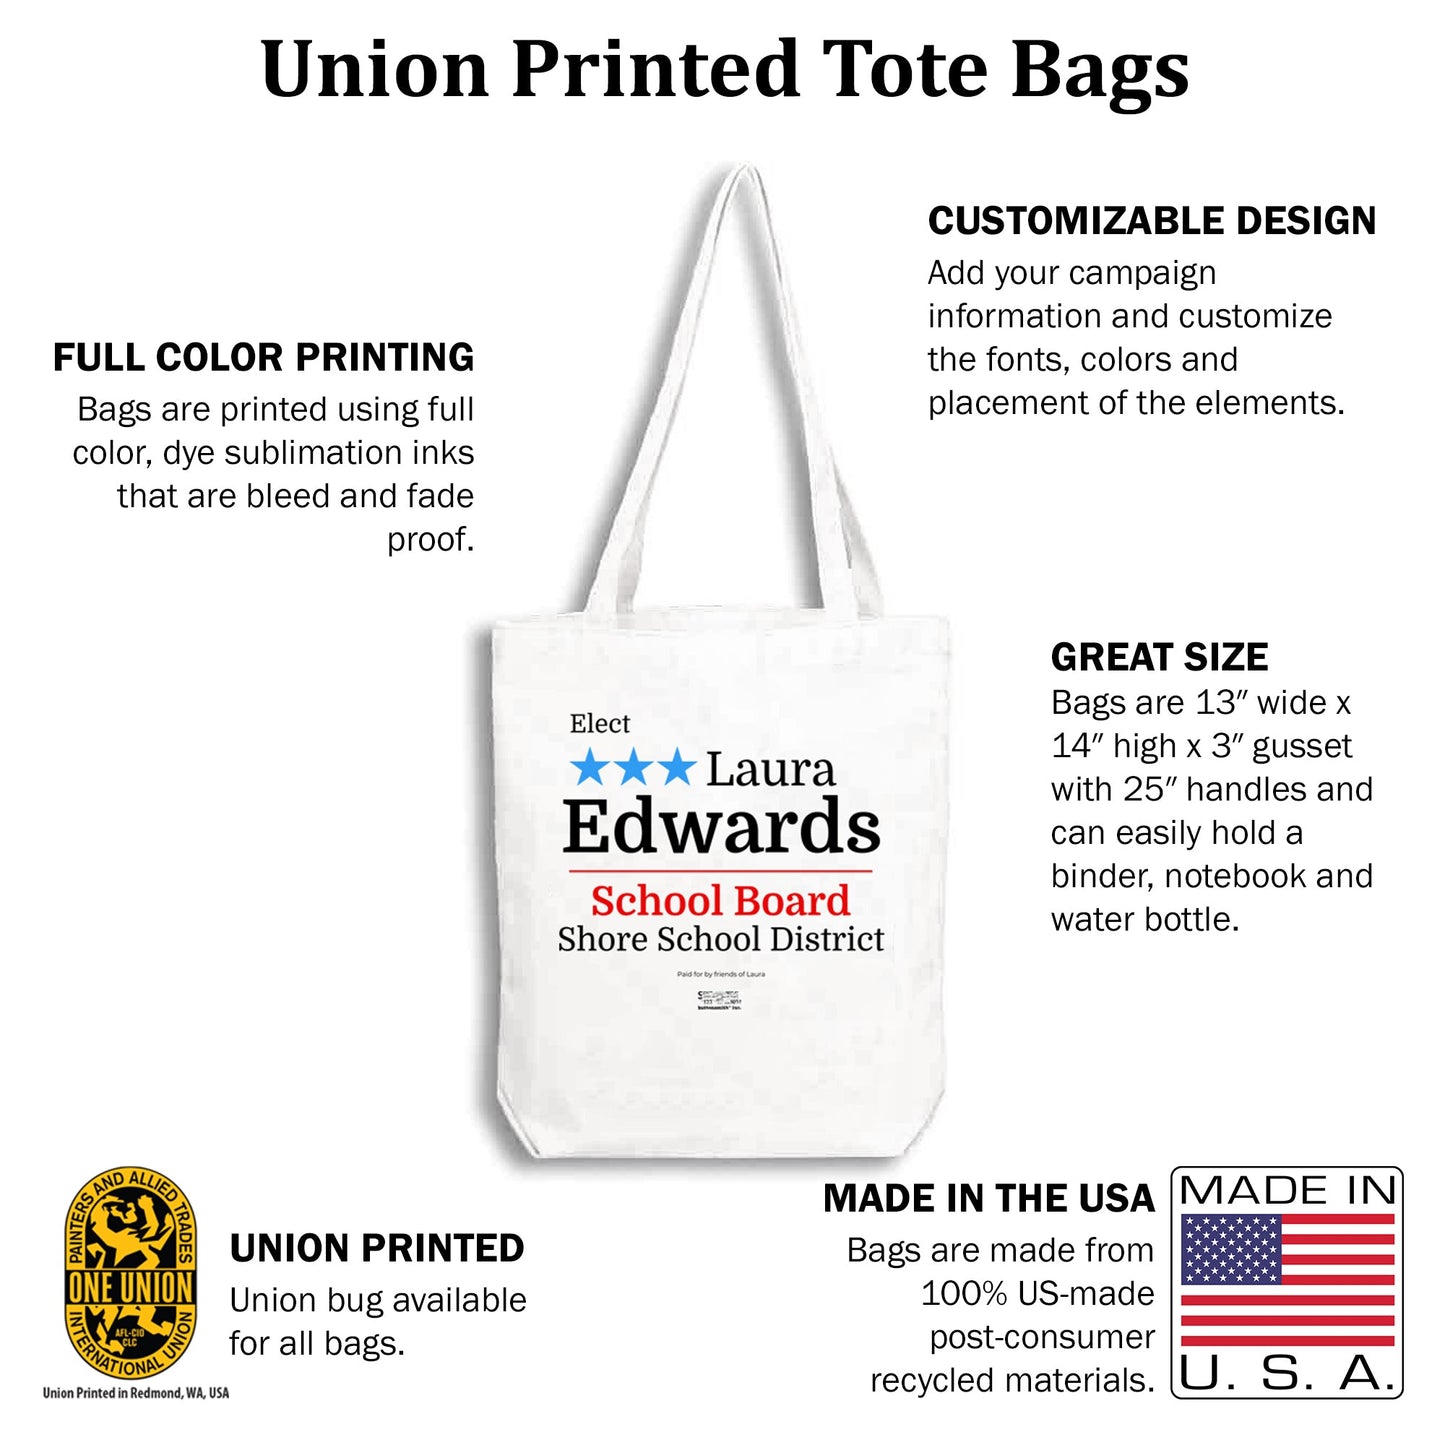 MerchBlue Union-Printed Tote Bag - Three Stars design - Made in the USA from recycled fabric